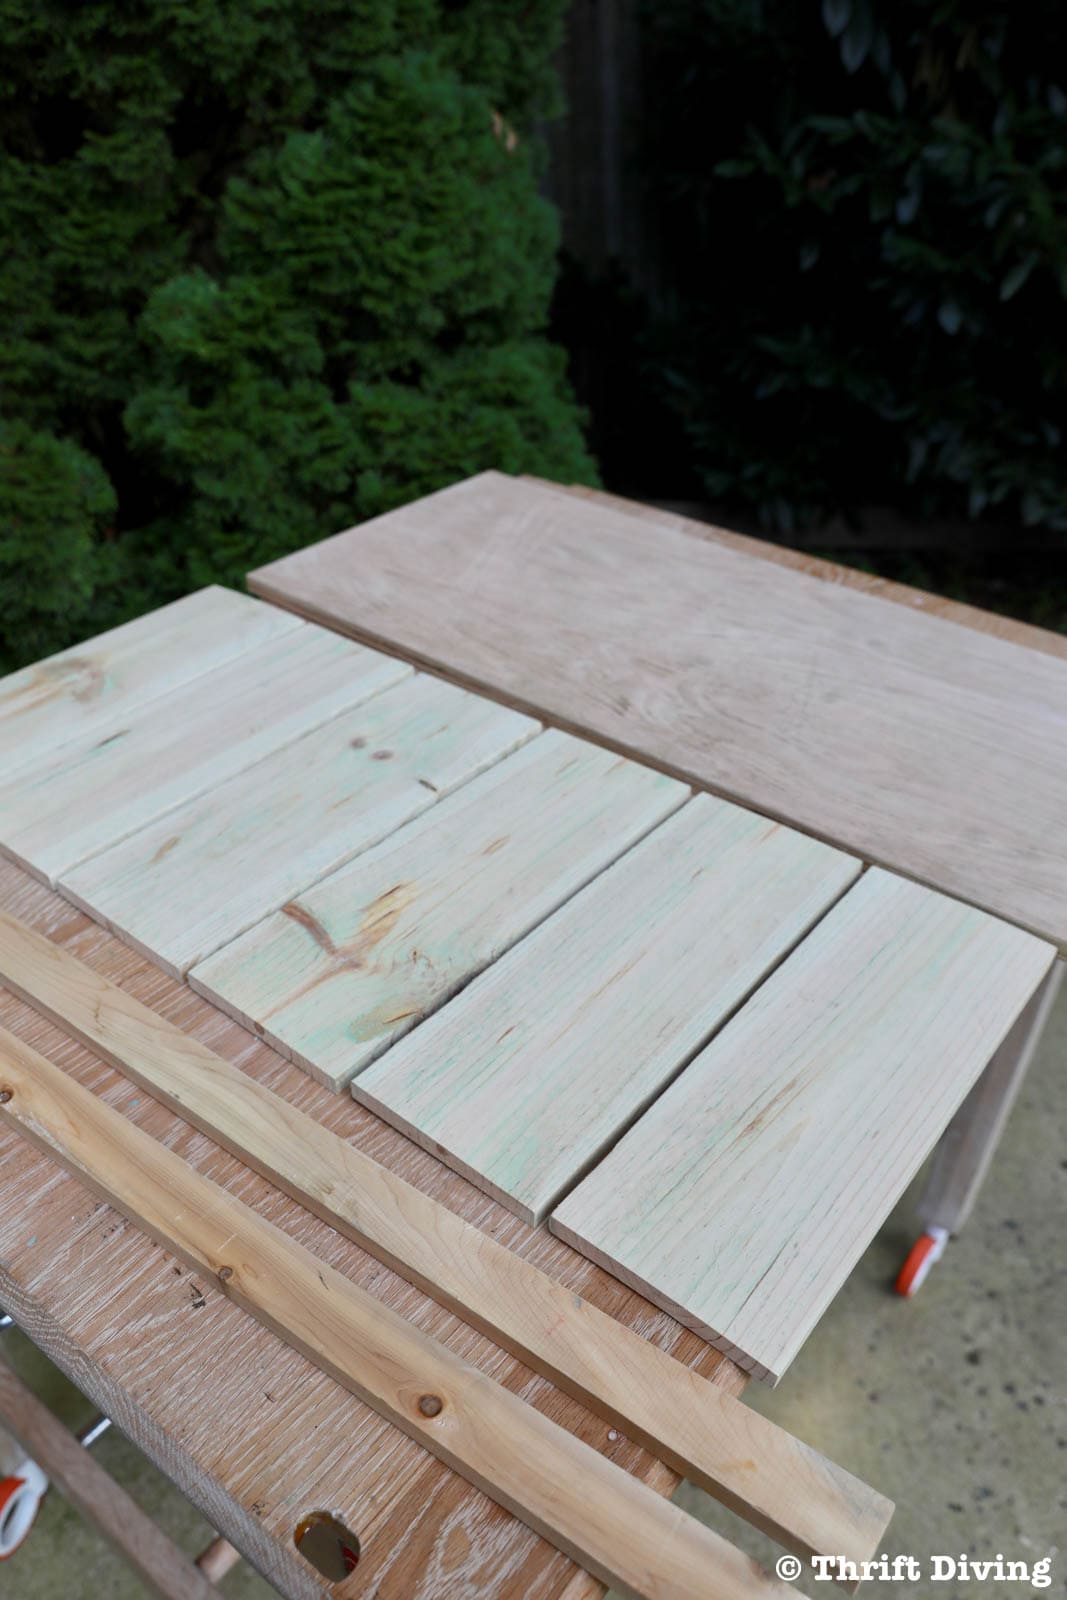 How to Build a Bat House - Wood needed to build a bat house - Cedar boards and red oak plywood - Thrift Diving